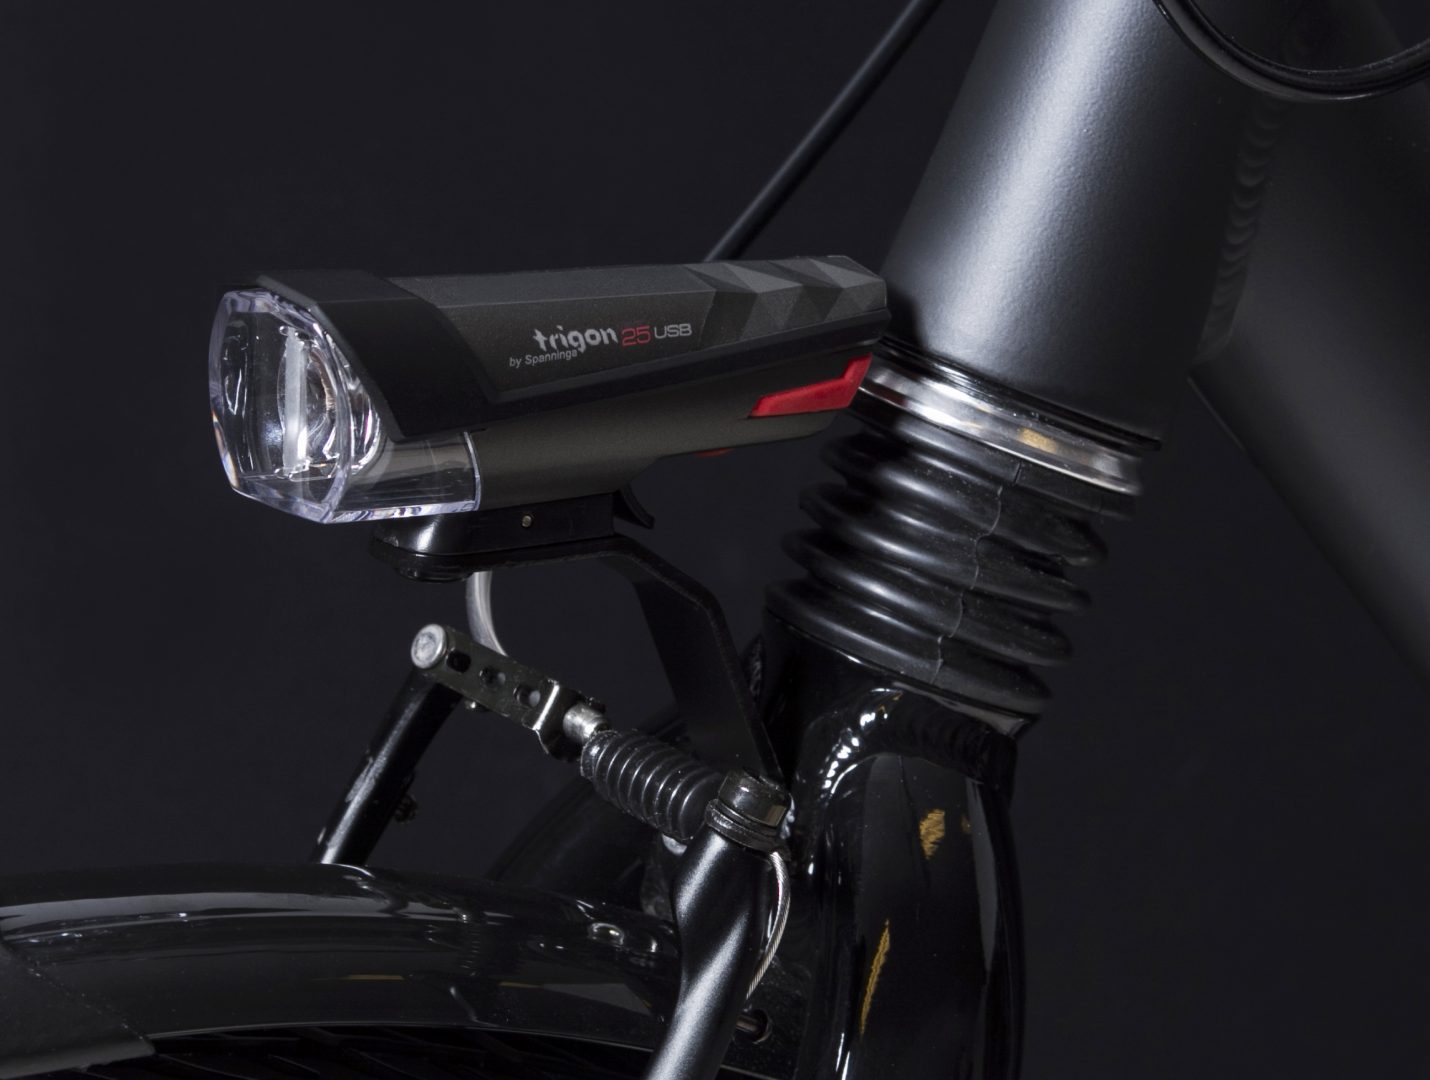 Trigon 25 Usb headlamp on front fork with Br 500 close up